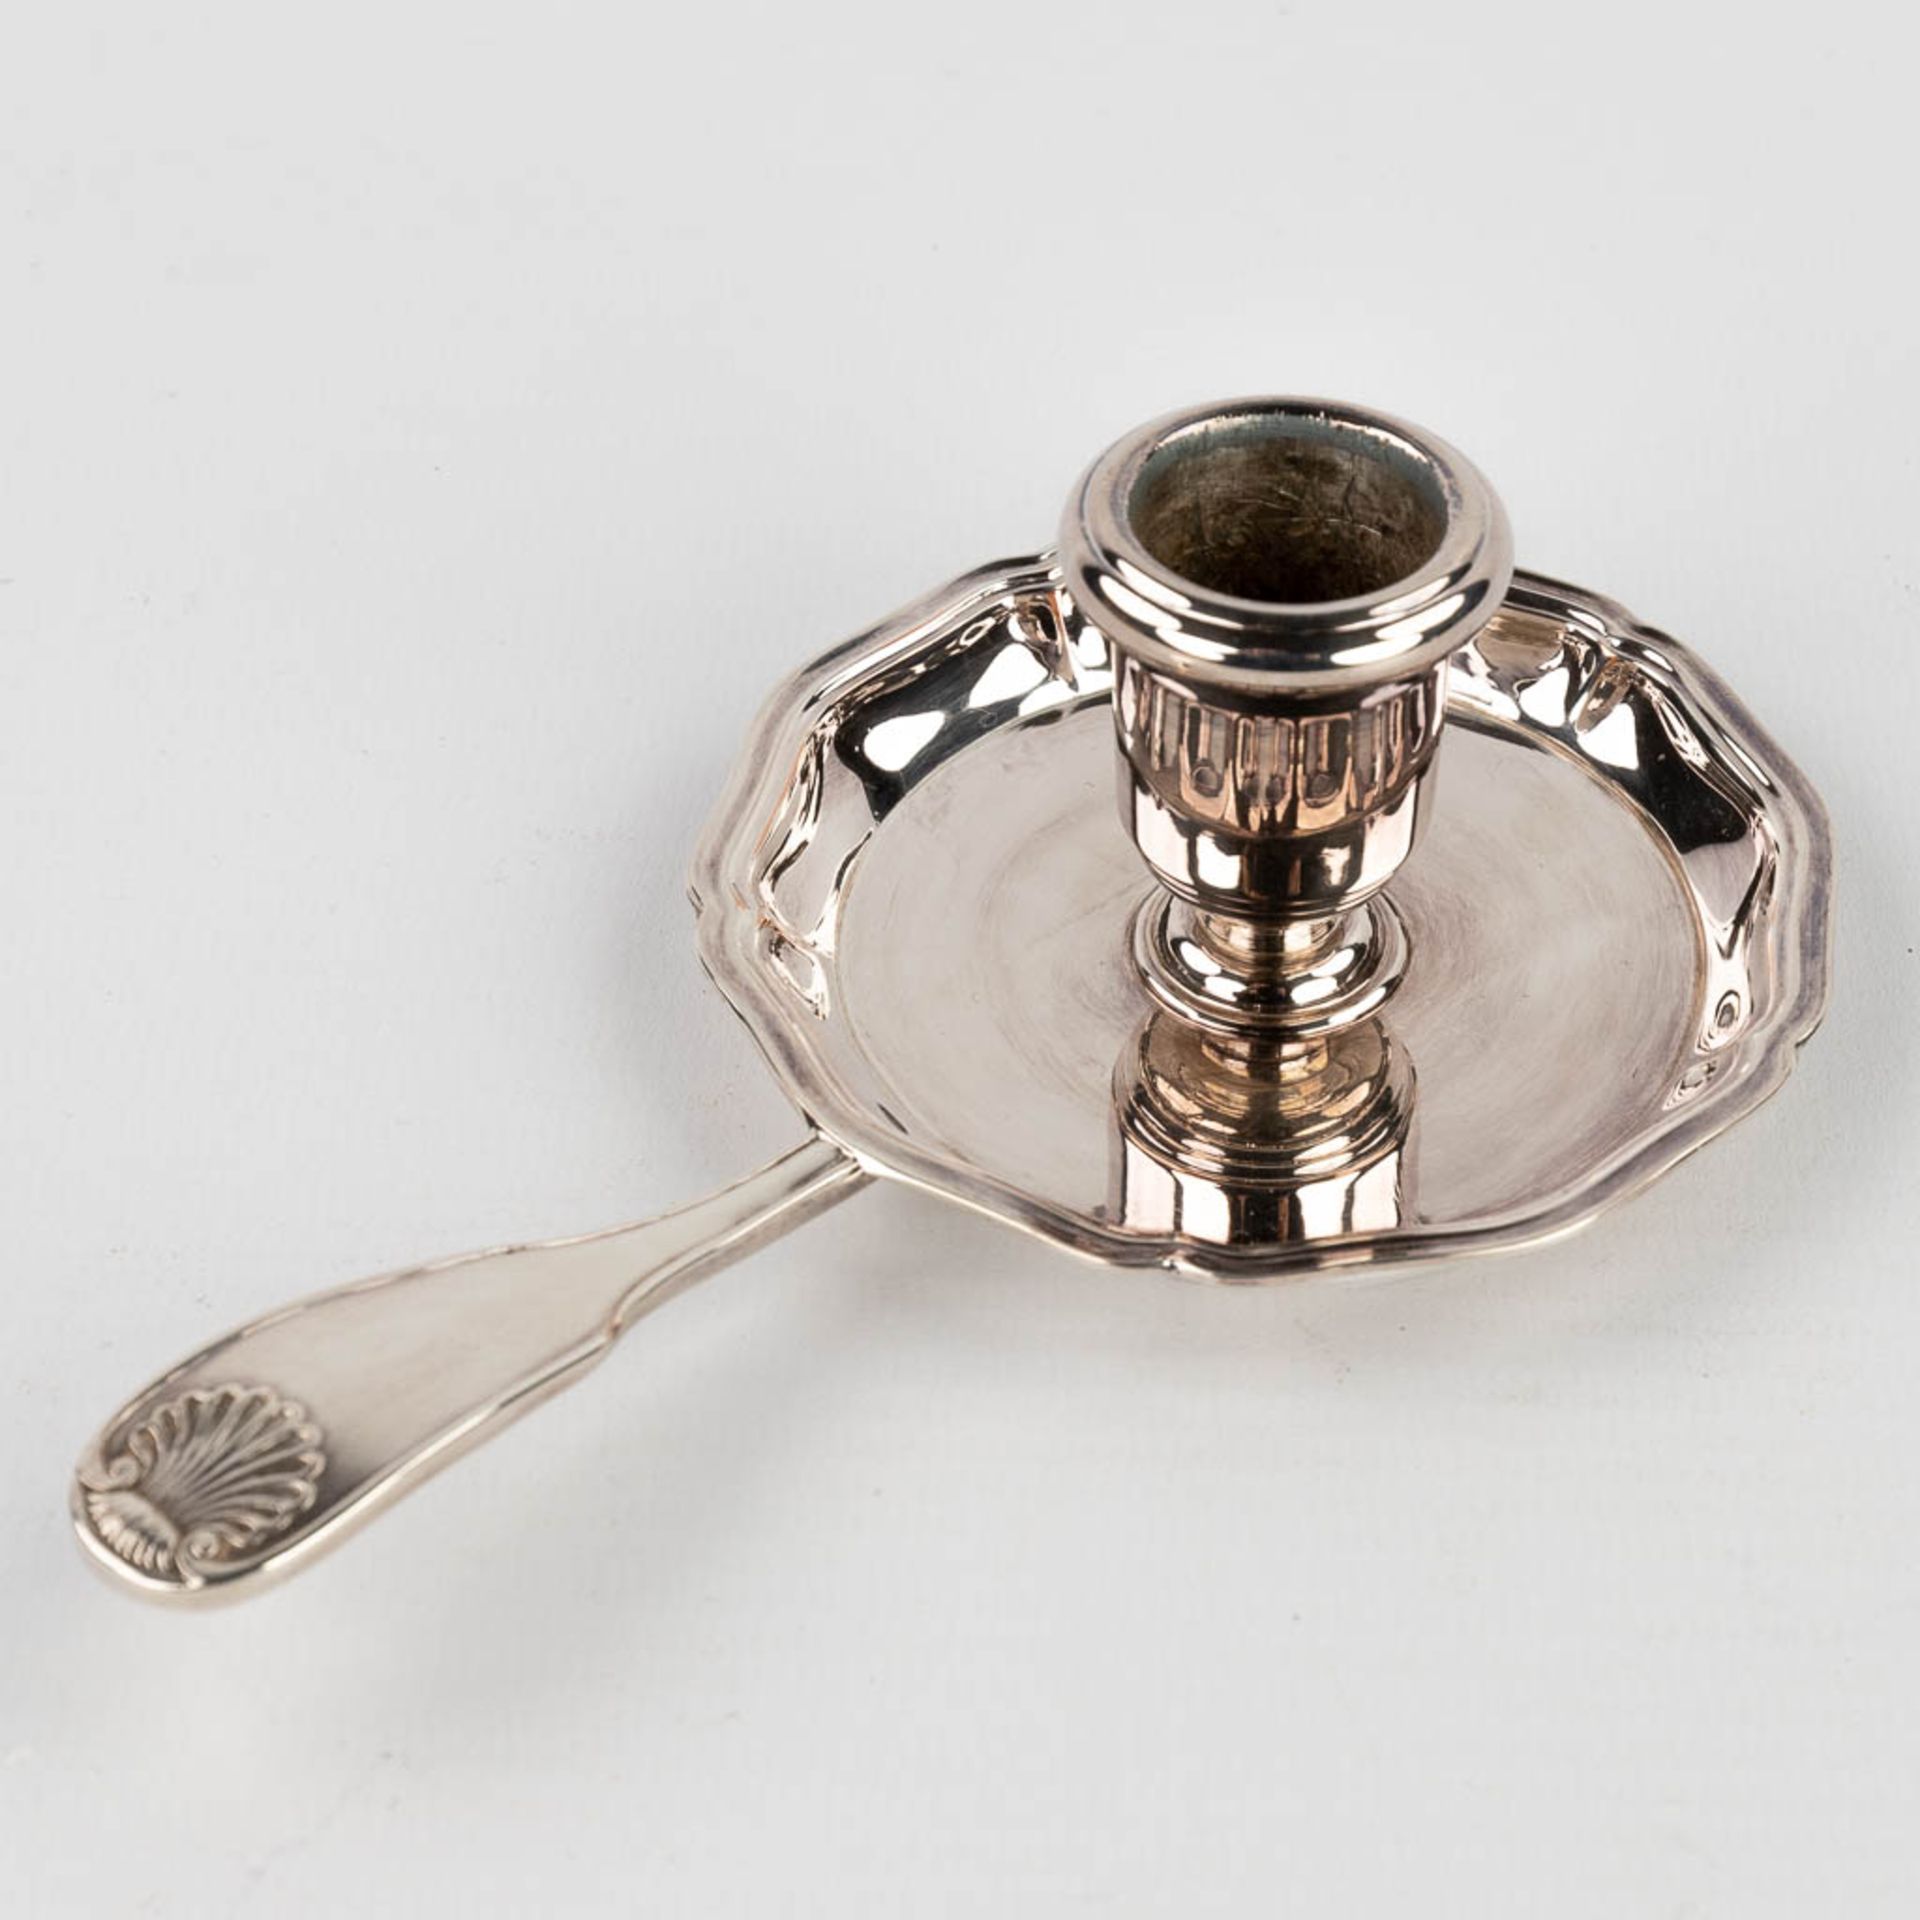 A collection of toilet accessories and goods, crystal, silver and silver-plated metal. (H: 12 cm) - Bild 17 aus 19